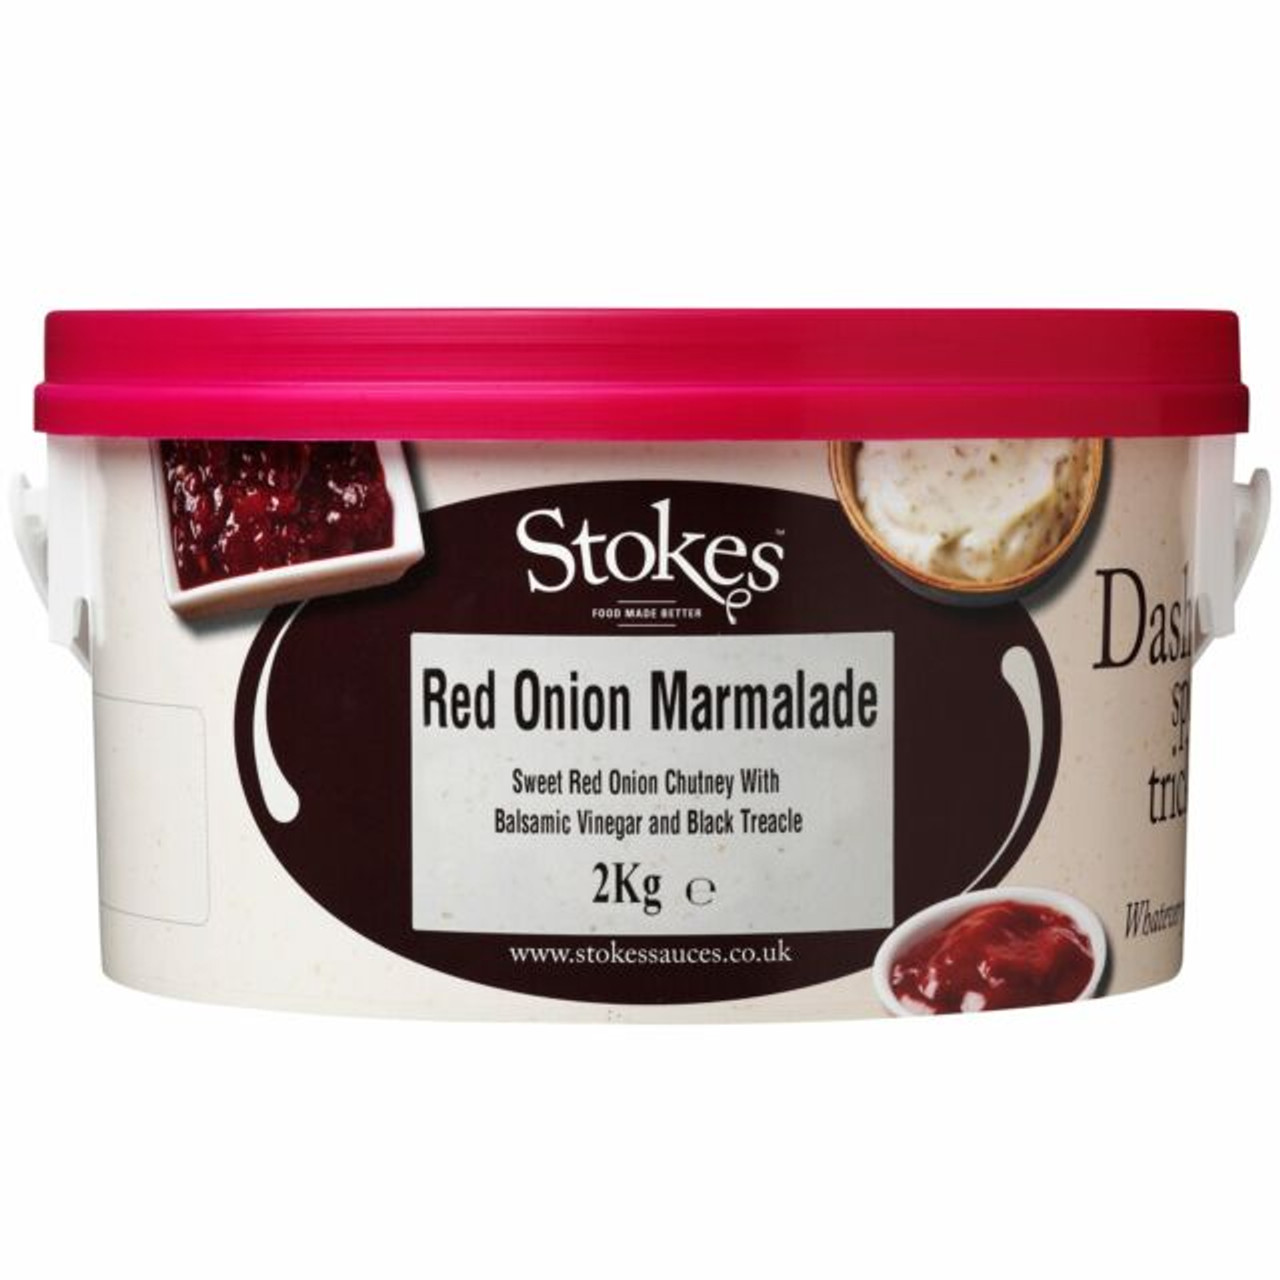 Stokes Red Onion Marmalade 2.4kg